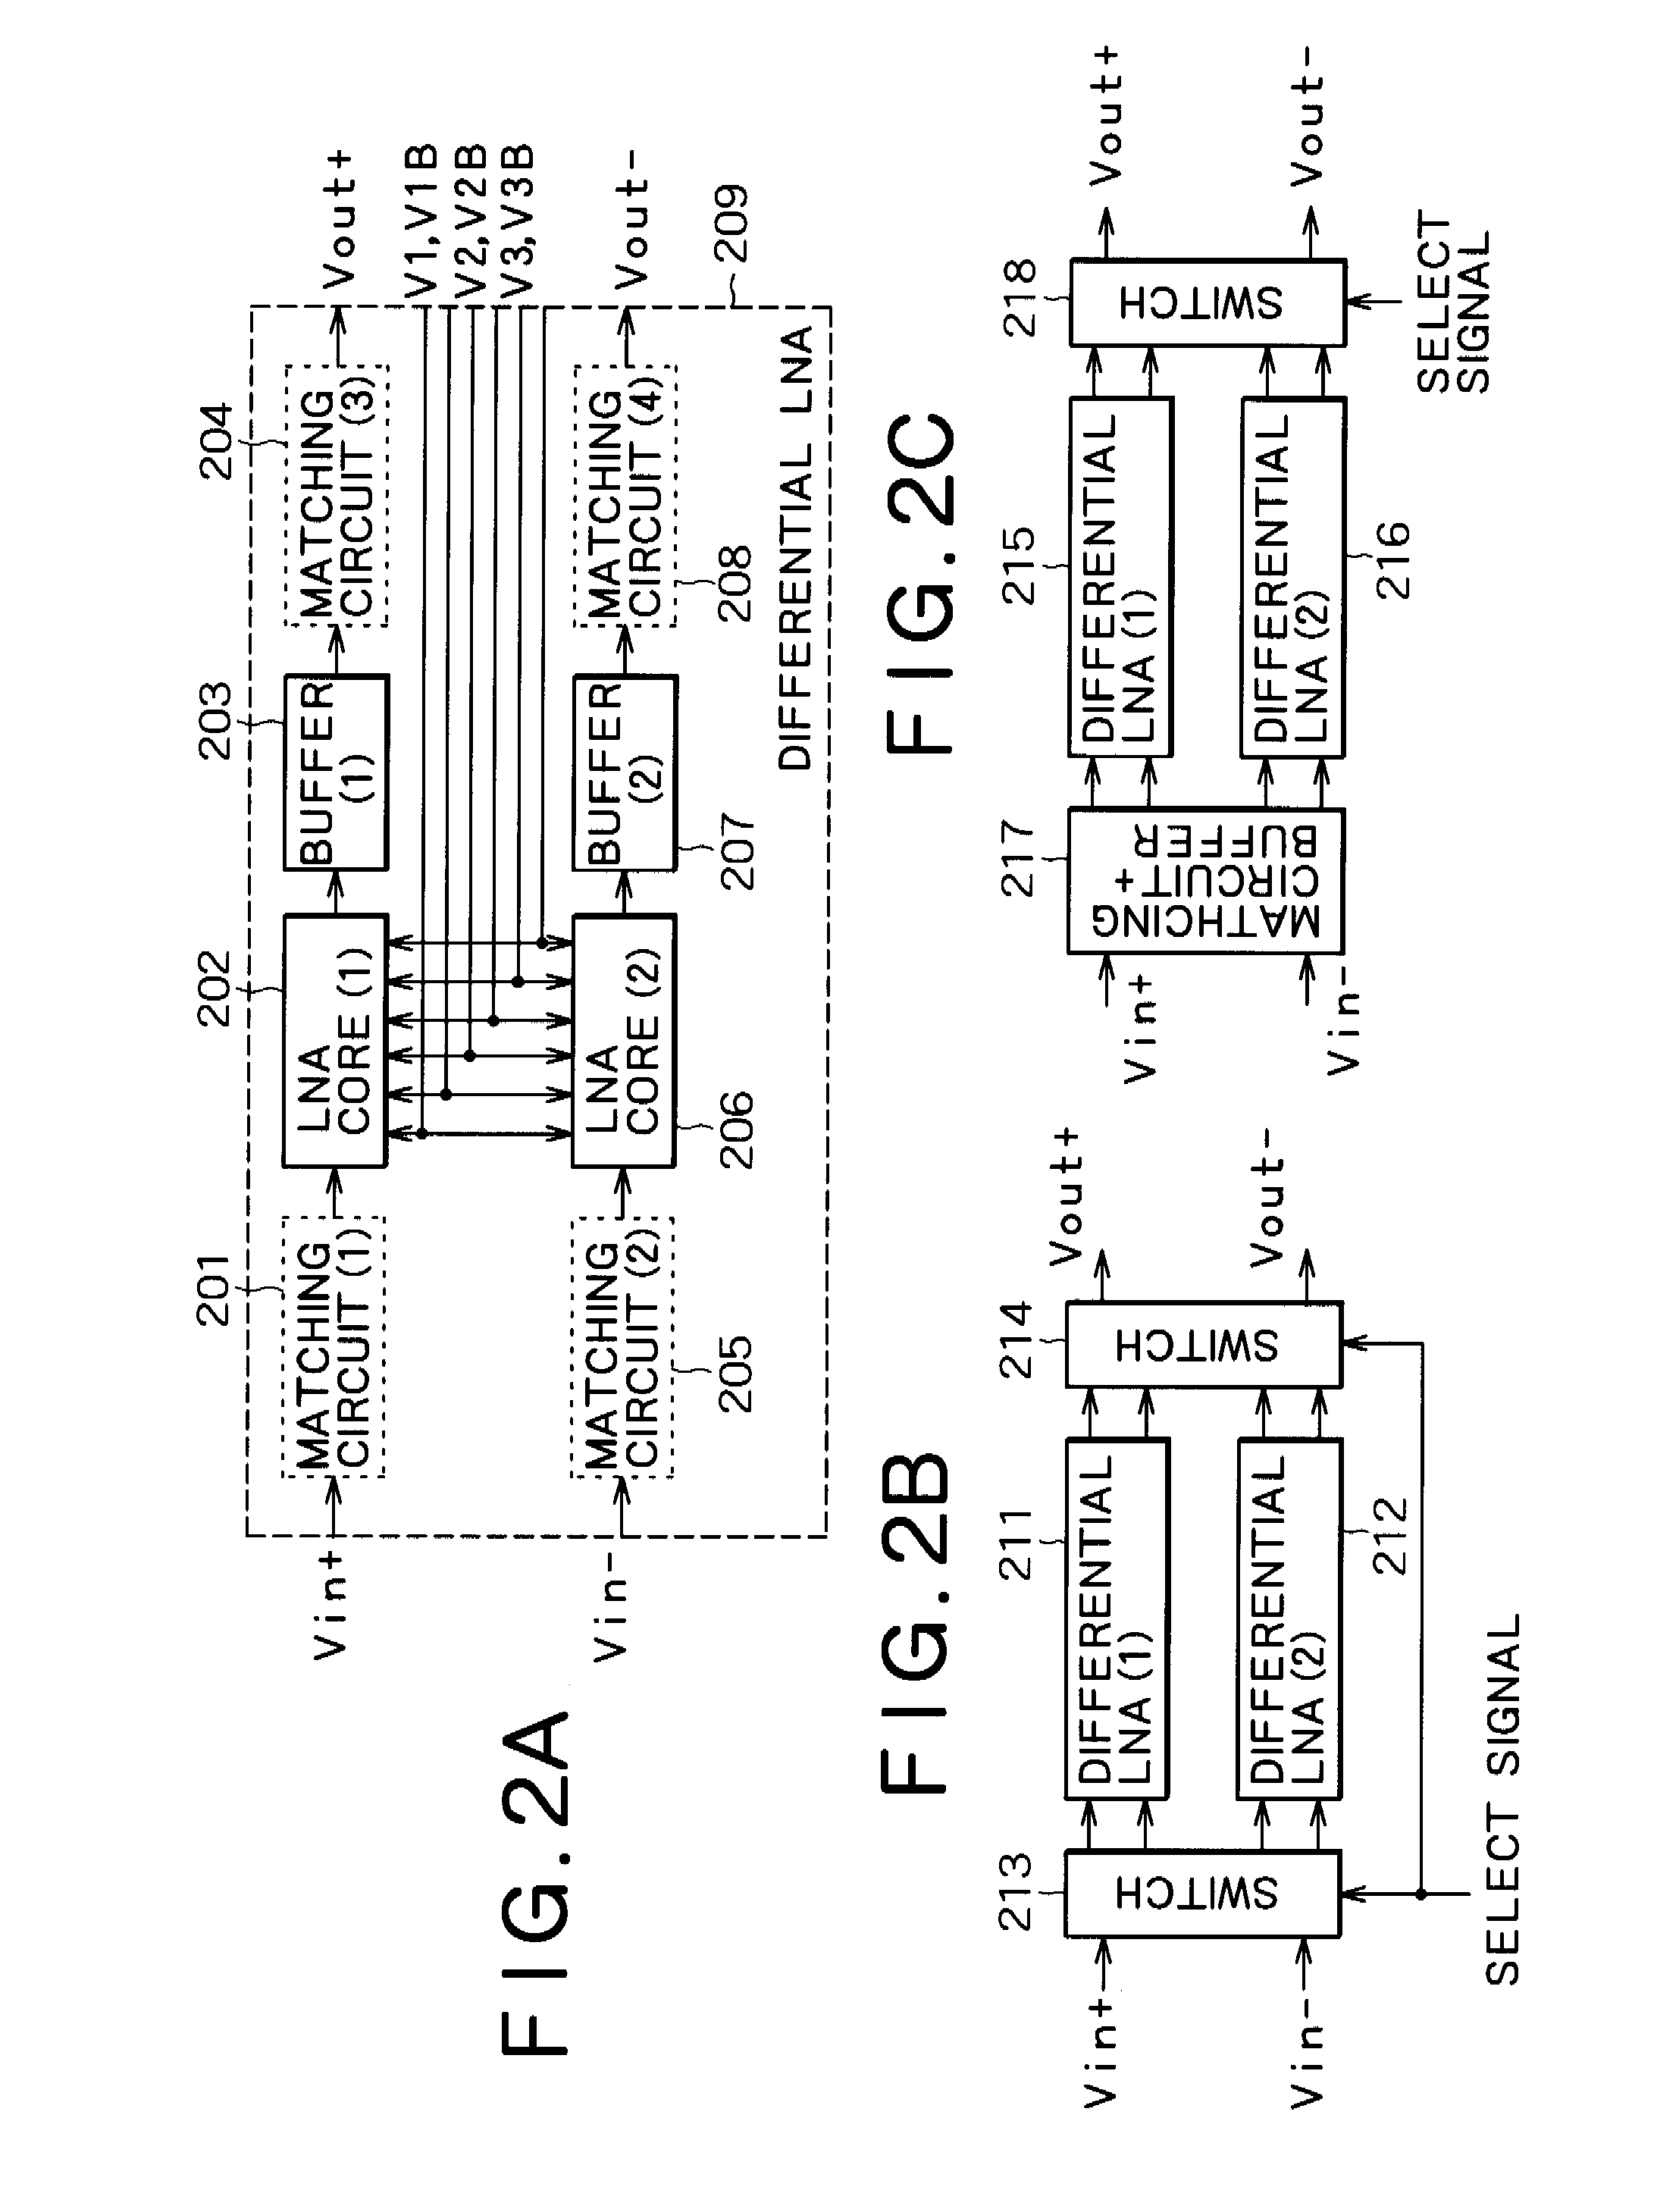 High-frequency amplification circuit